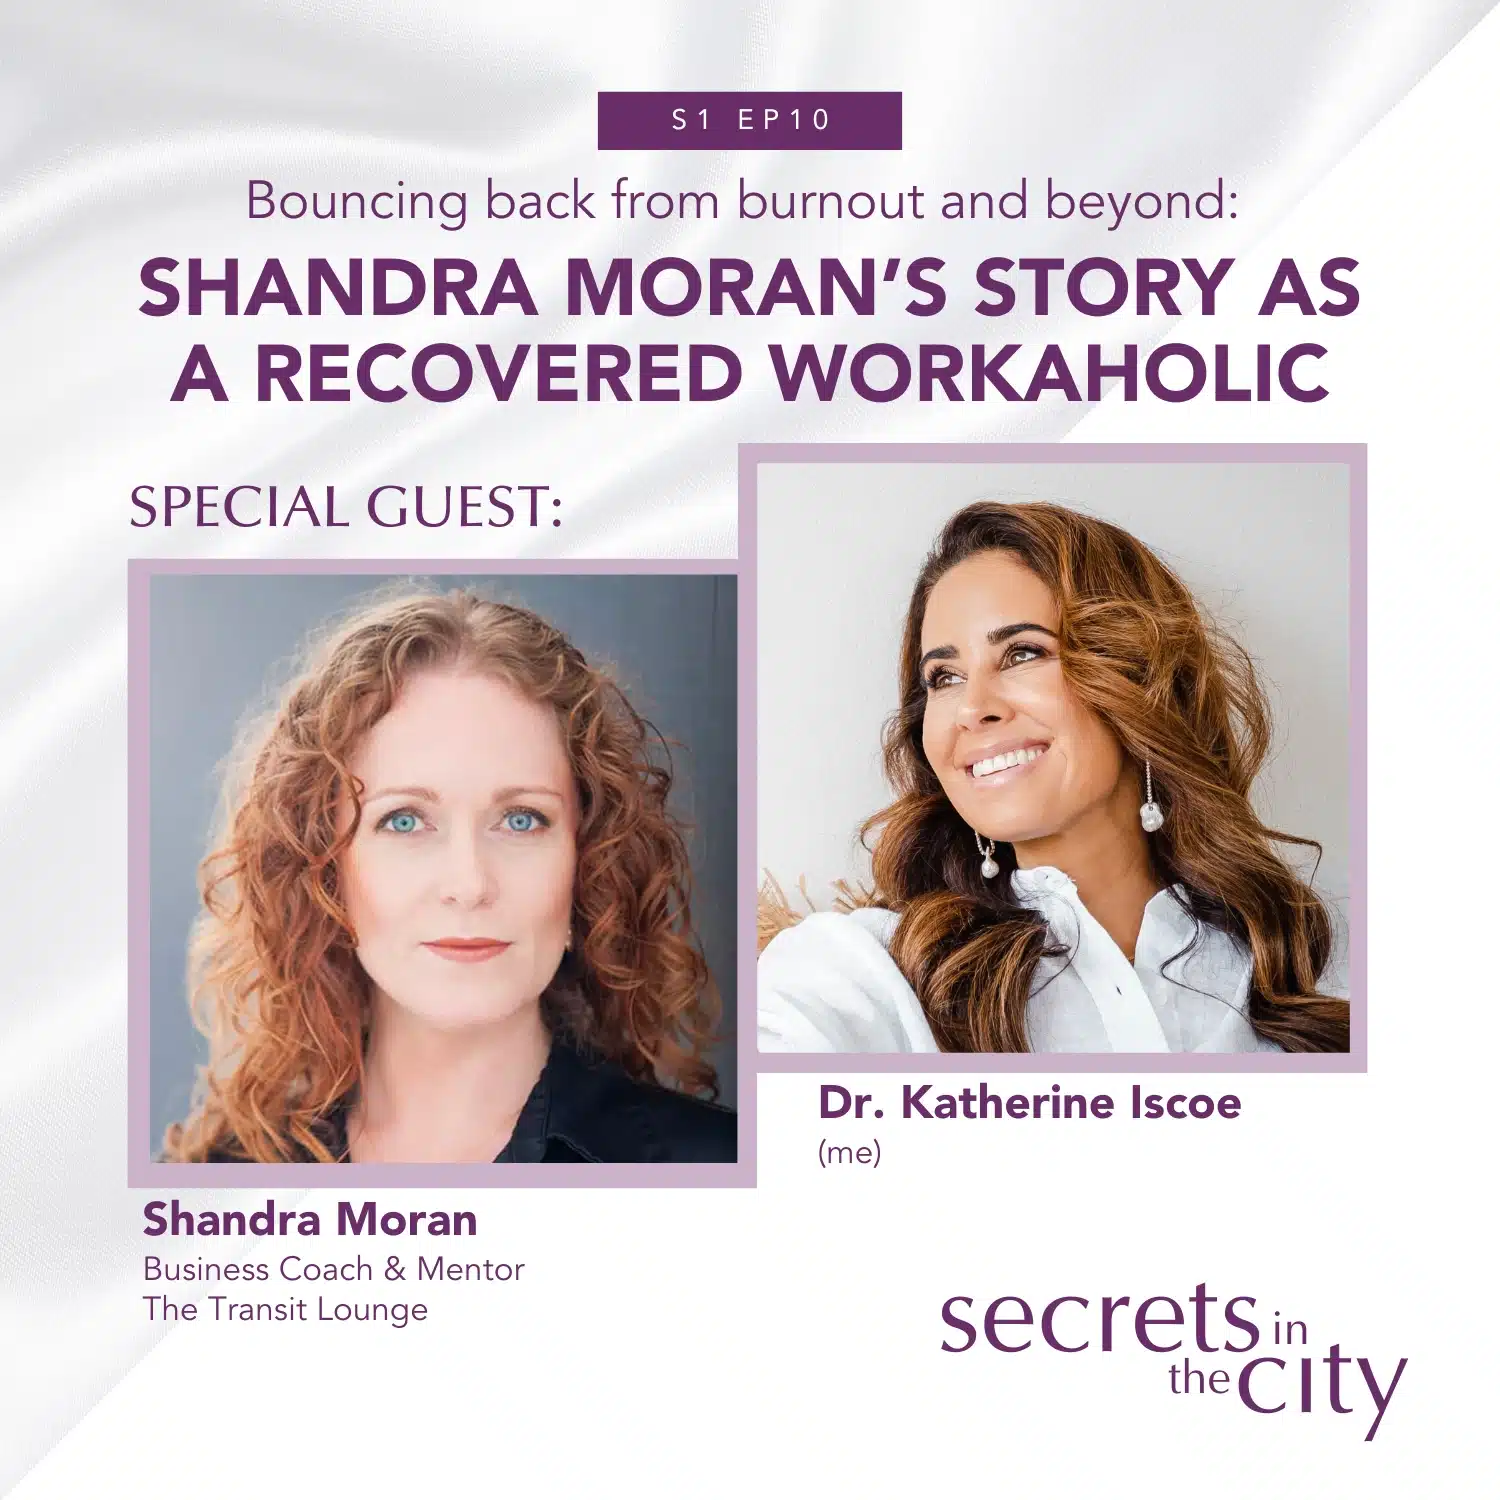 Secrets in the City podcast cover featuring photos of Shandra Moran and Dr. Katherine Iscoe